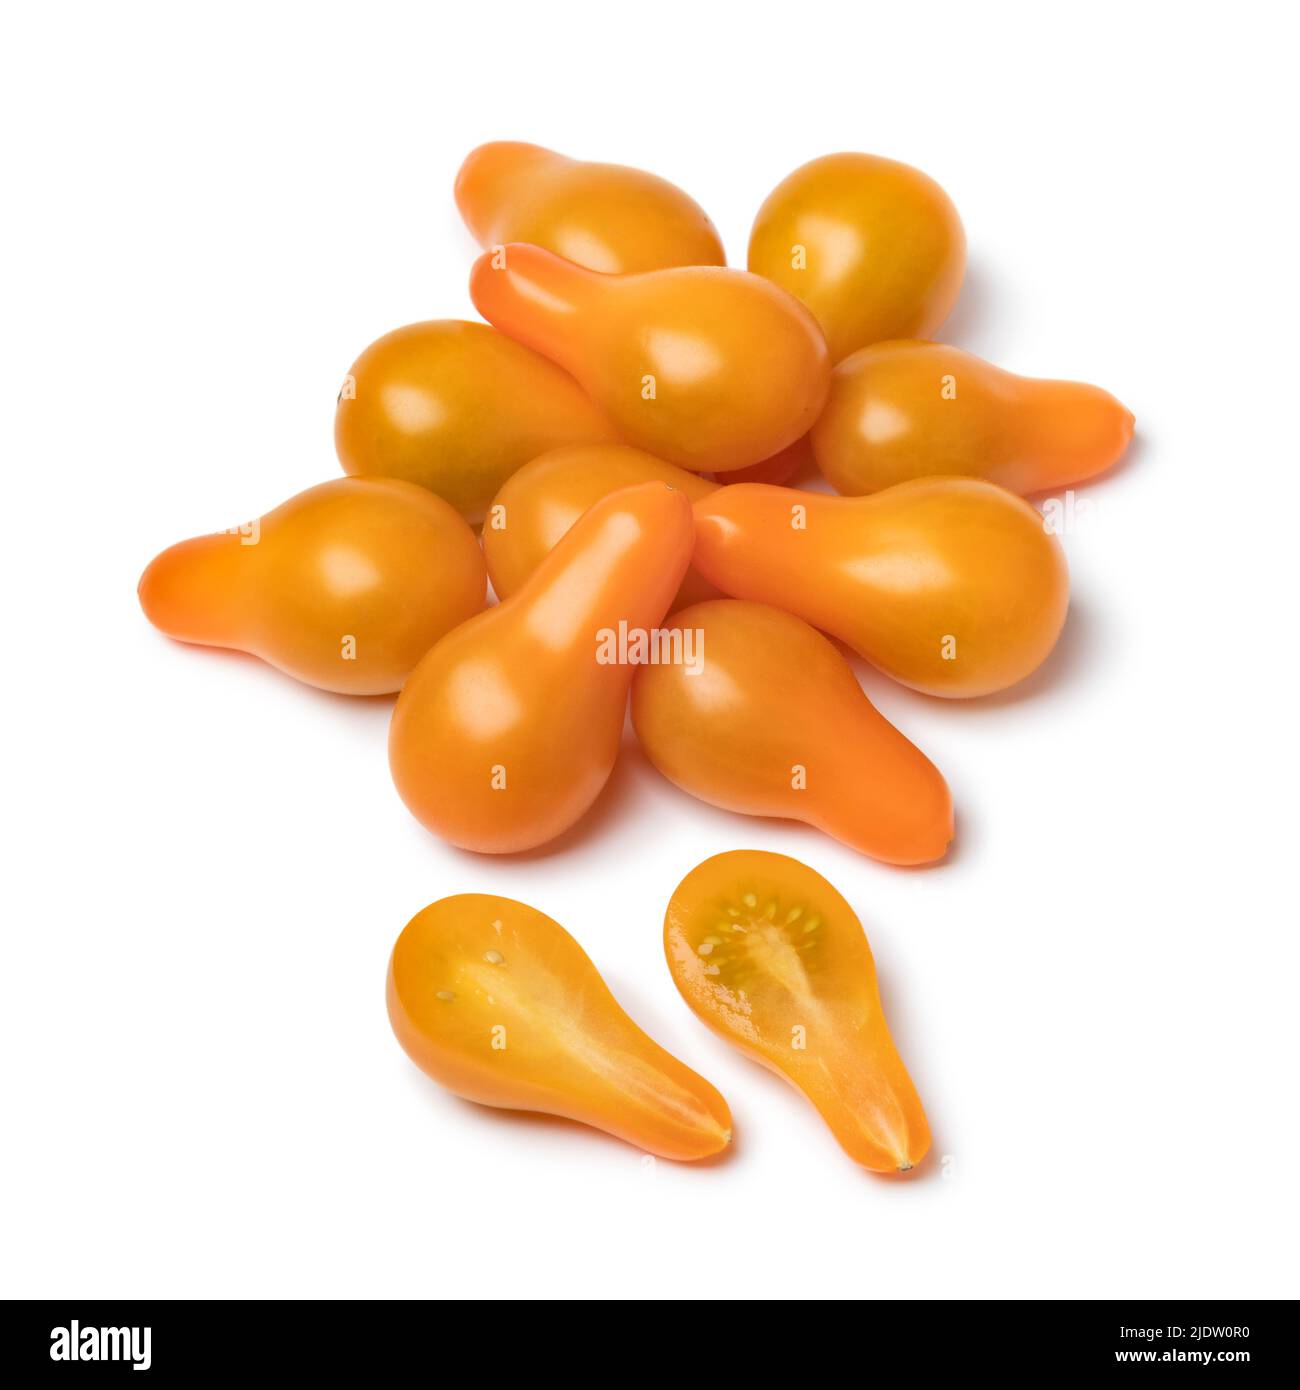 Heap of yellow whole and halved pear tomatoes isolated on white background  close up Stock Photo